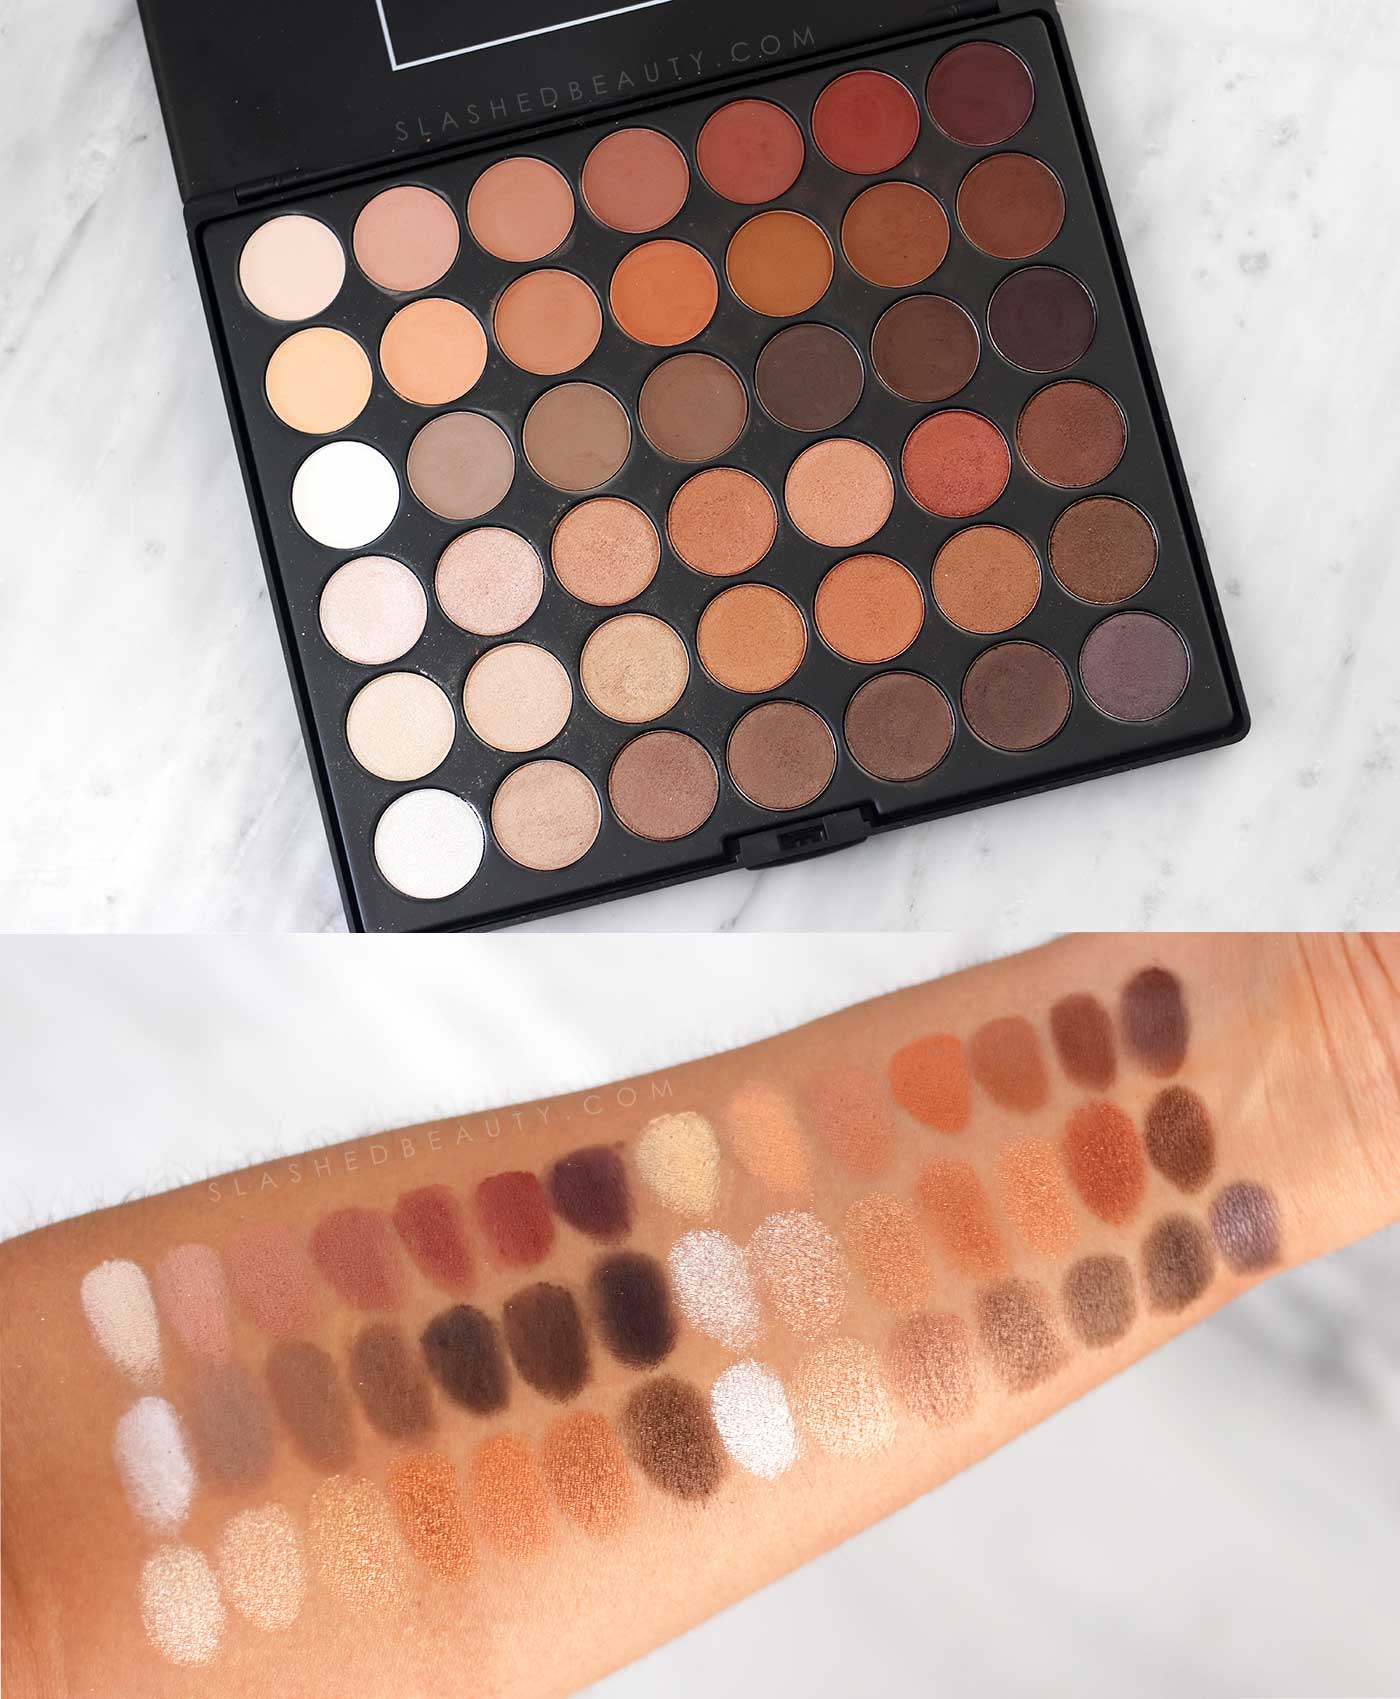 BH Cosmetics Studio Pro Ultimate Neutrals Palette Swatches | 5 Neutral Eyeshadow Palettes for Every Budget | Slashed Beauty